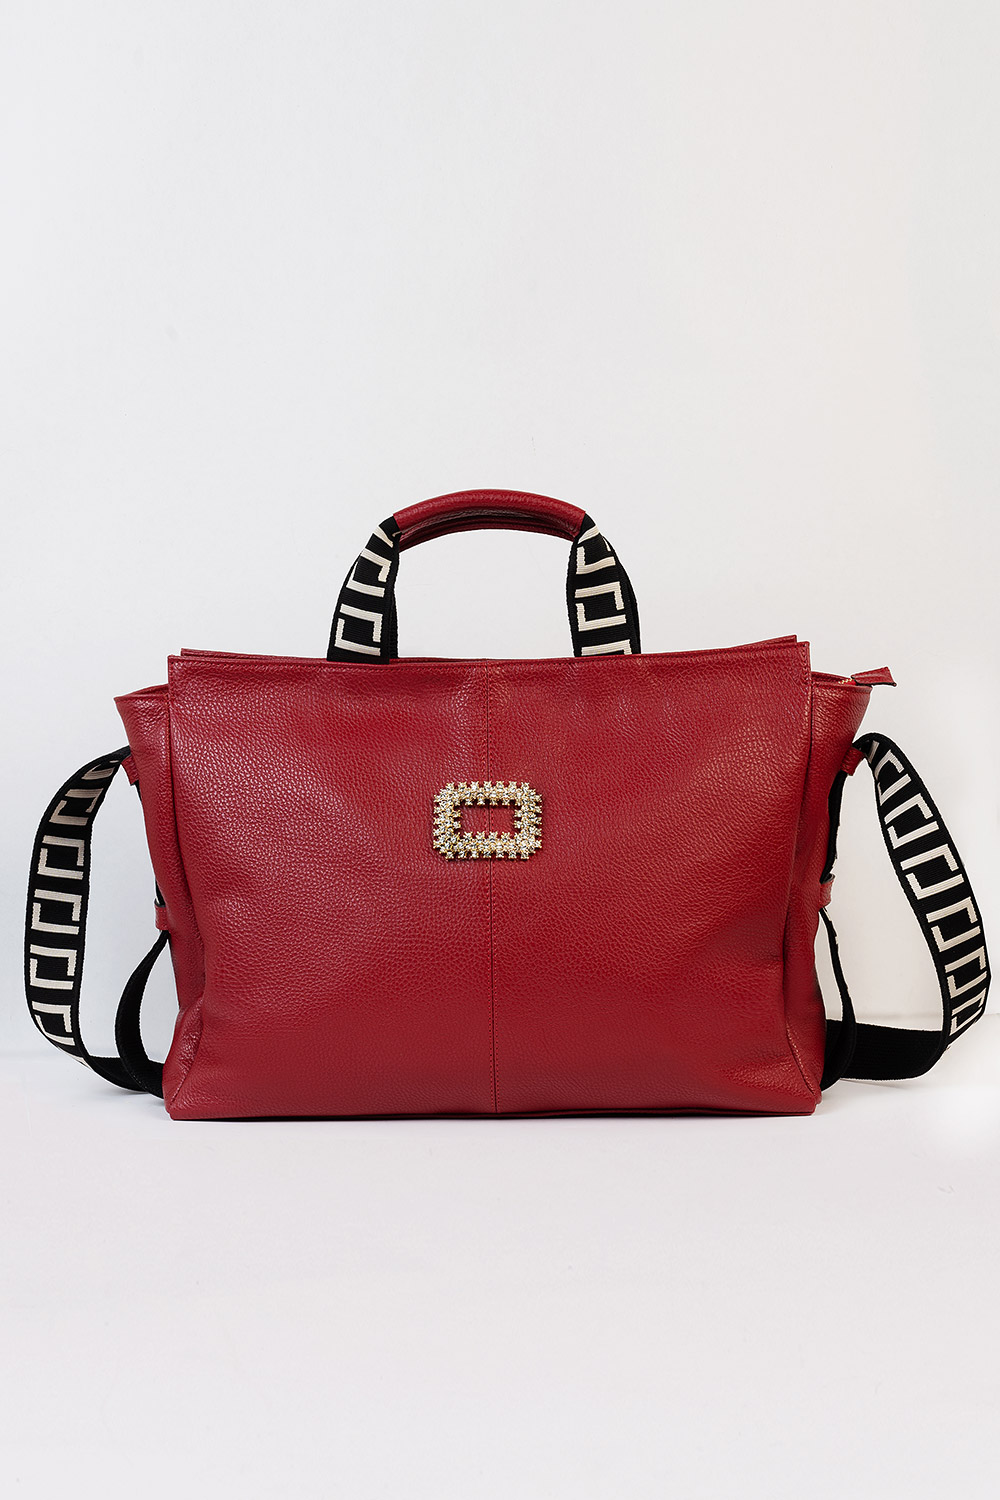 FERGIE Leather Bag Red